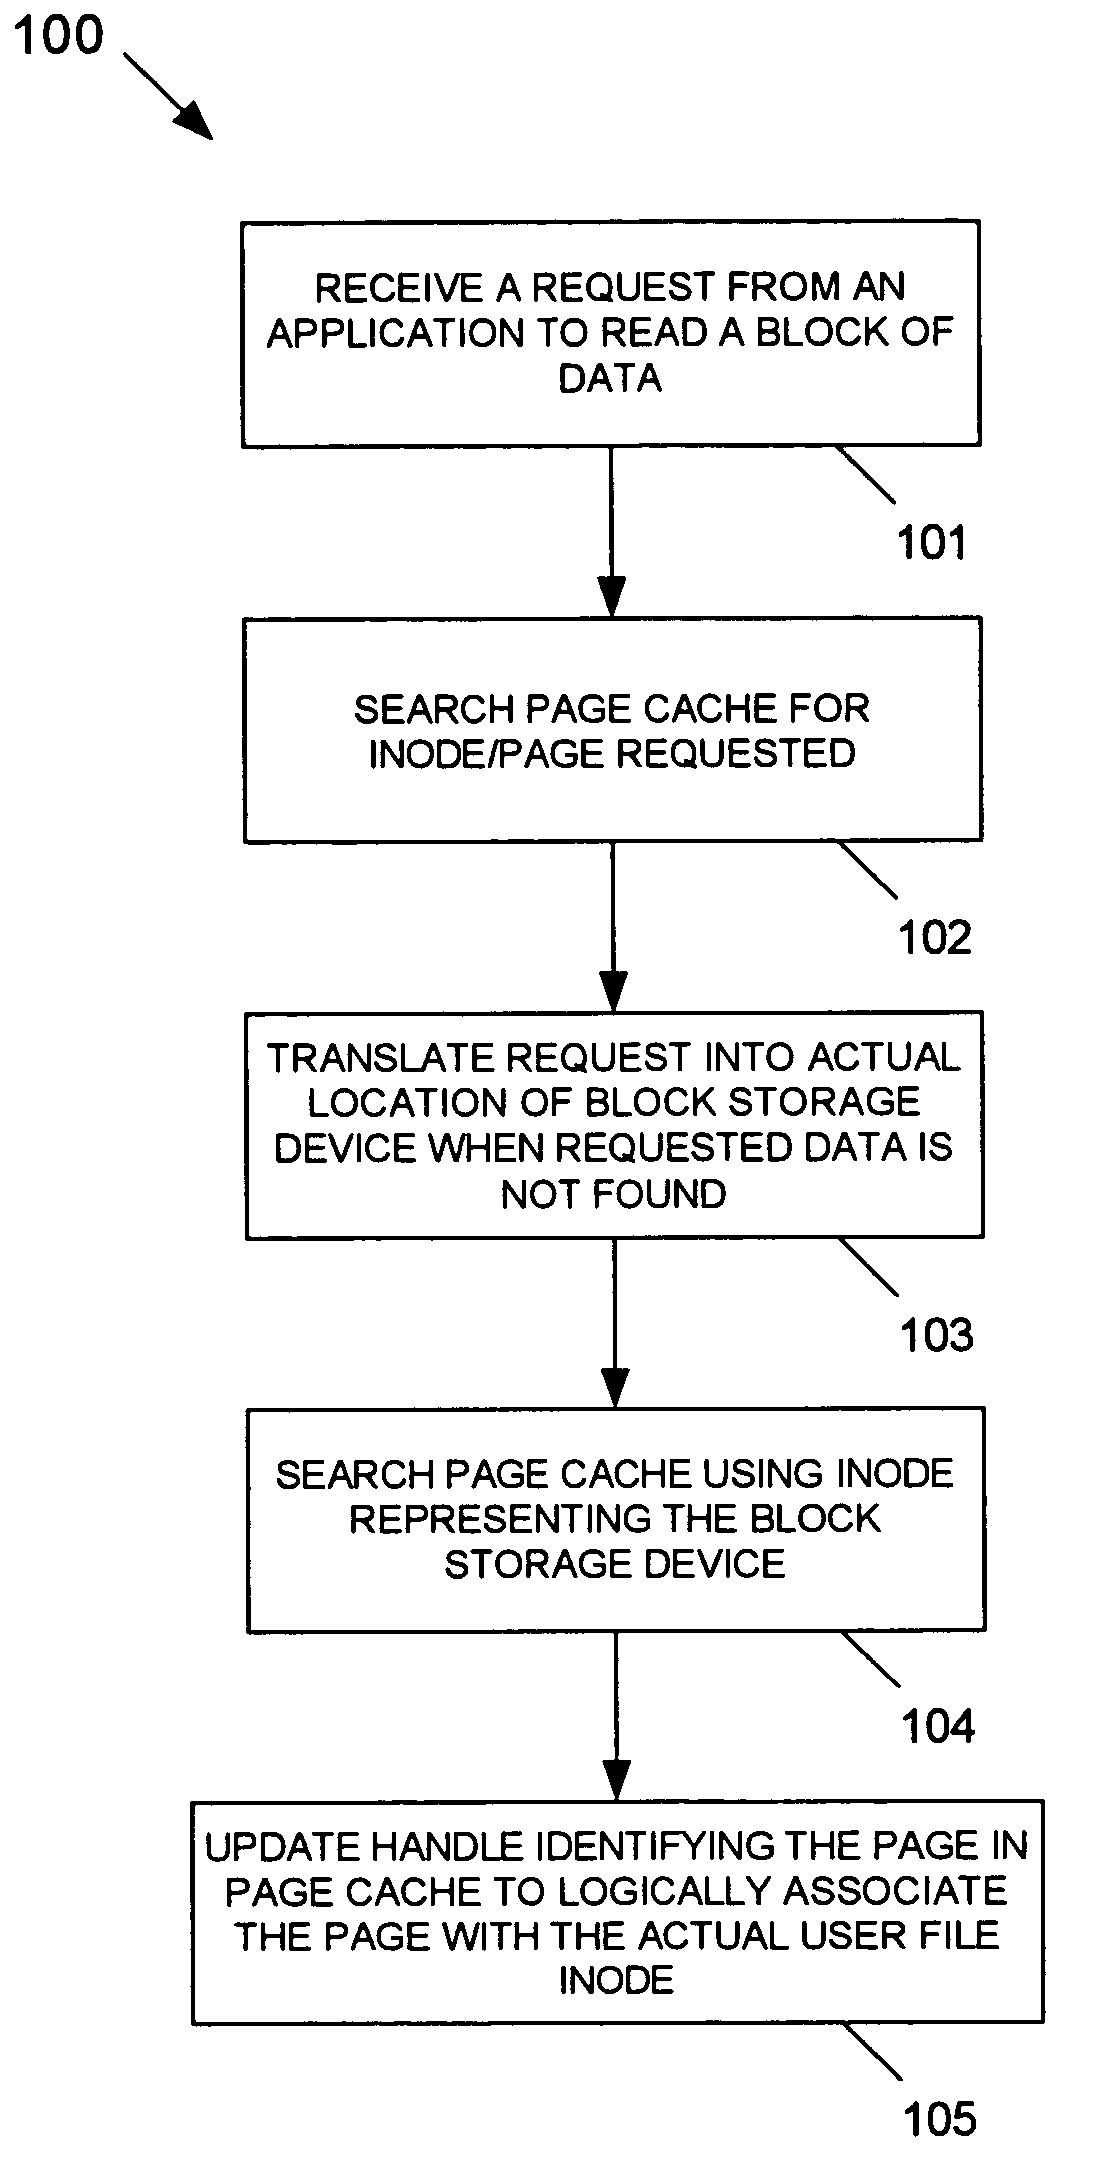 Multi-level page cache for enhanced file system performance via read ahead